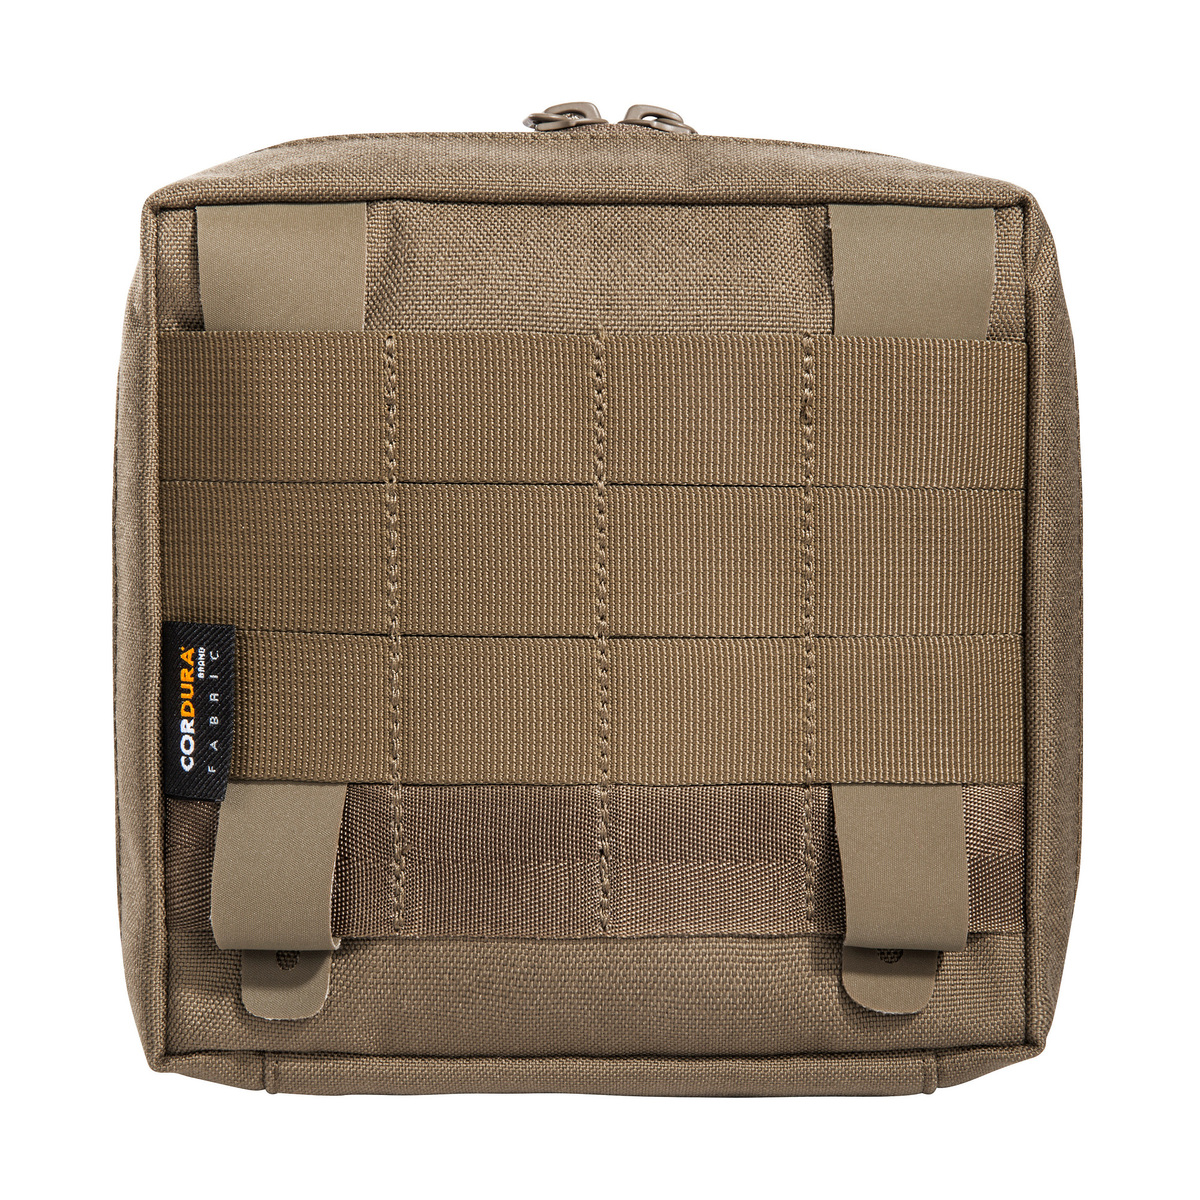 Tac Pouch 5.1 Coyote Brown